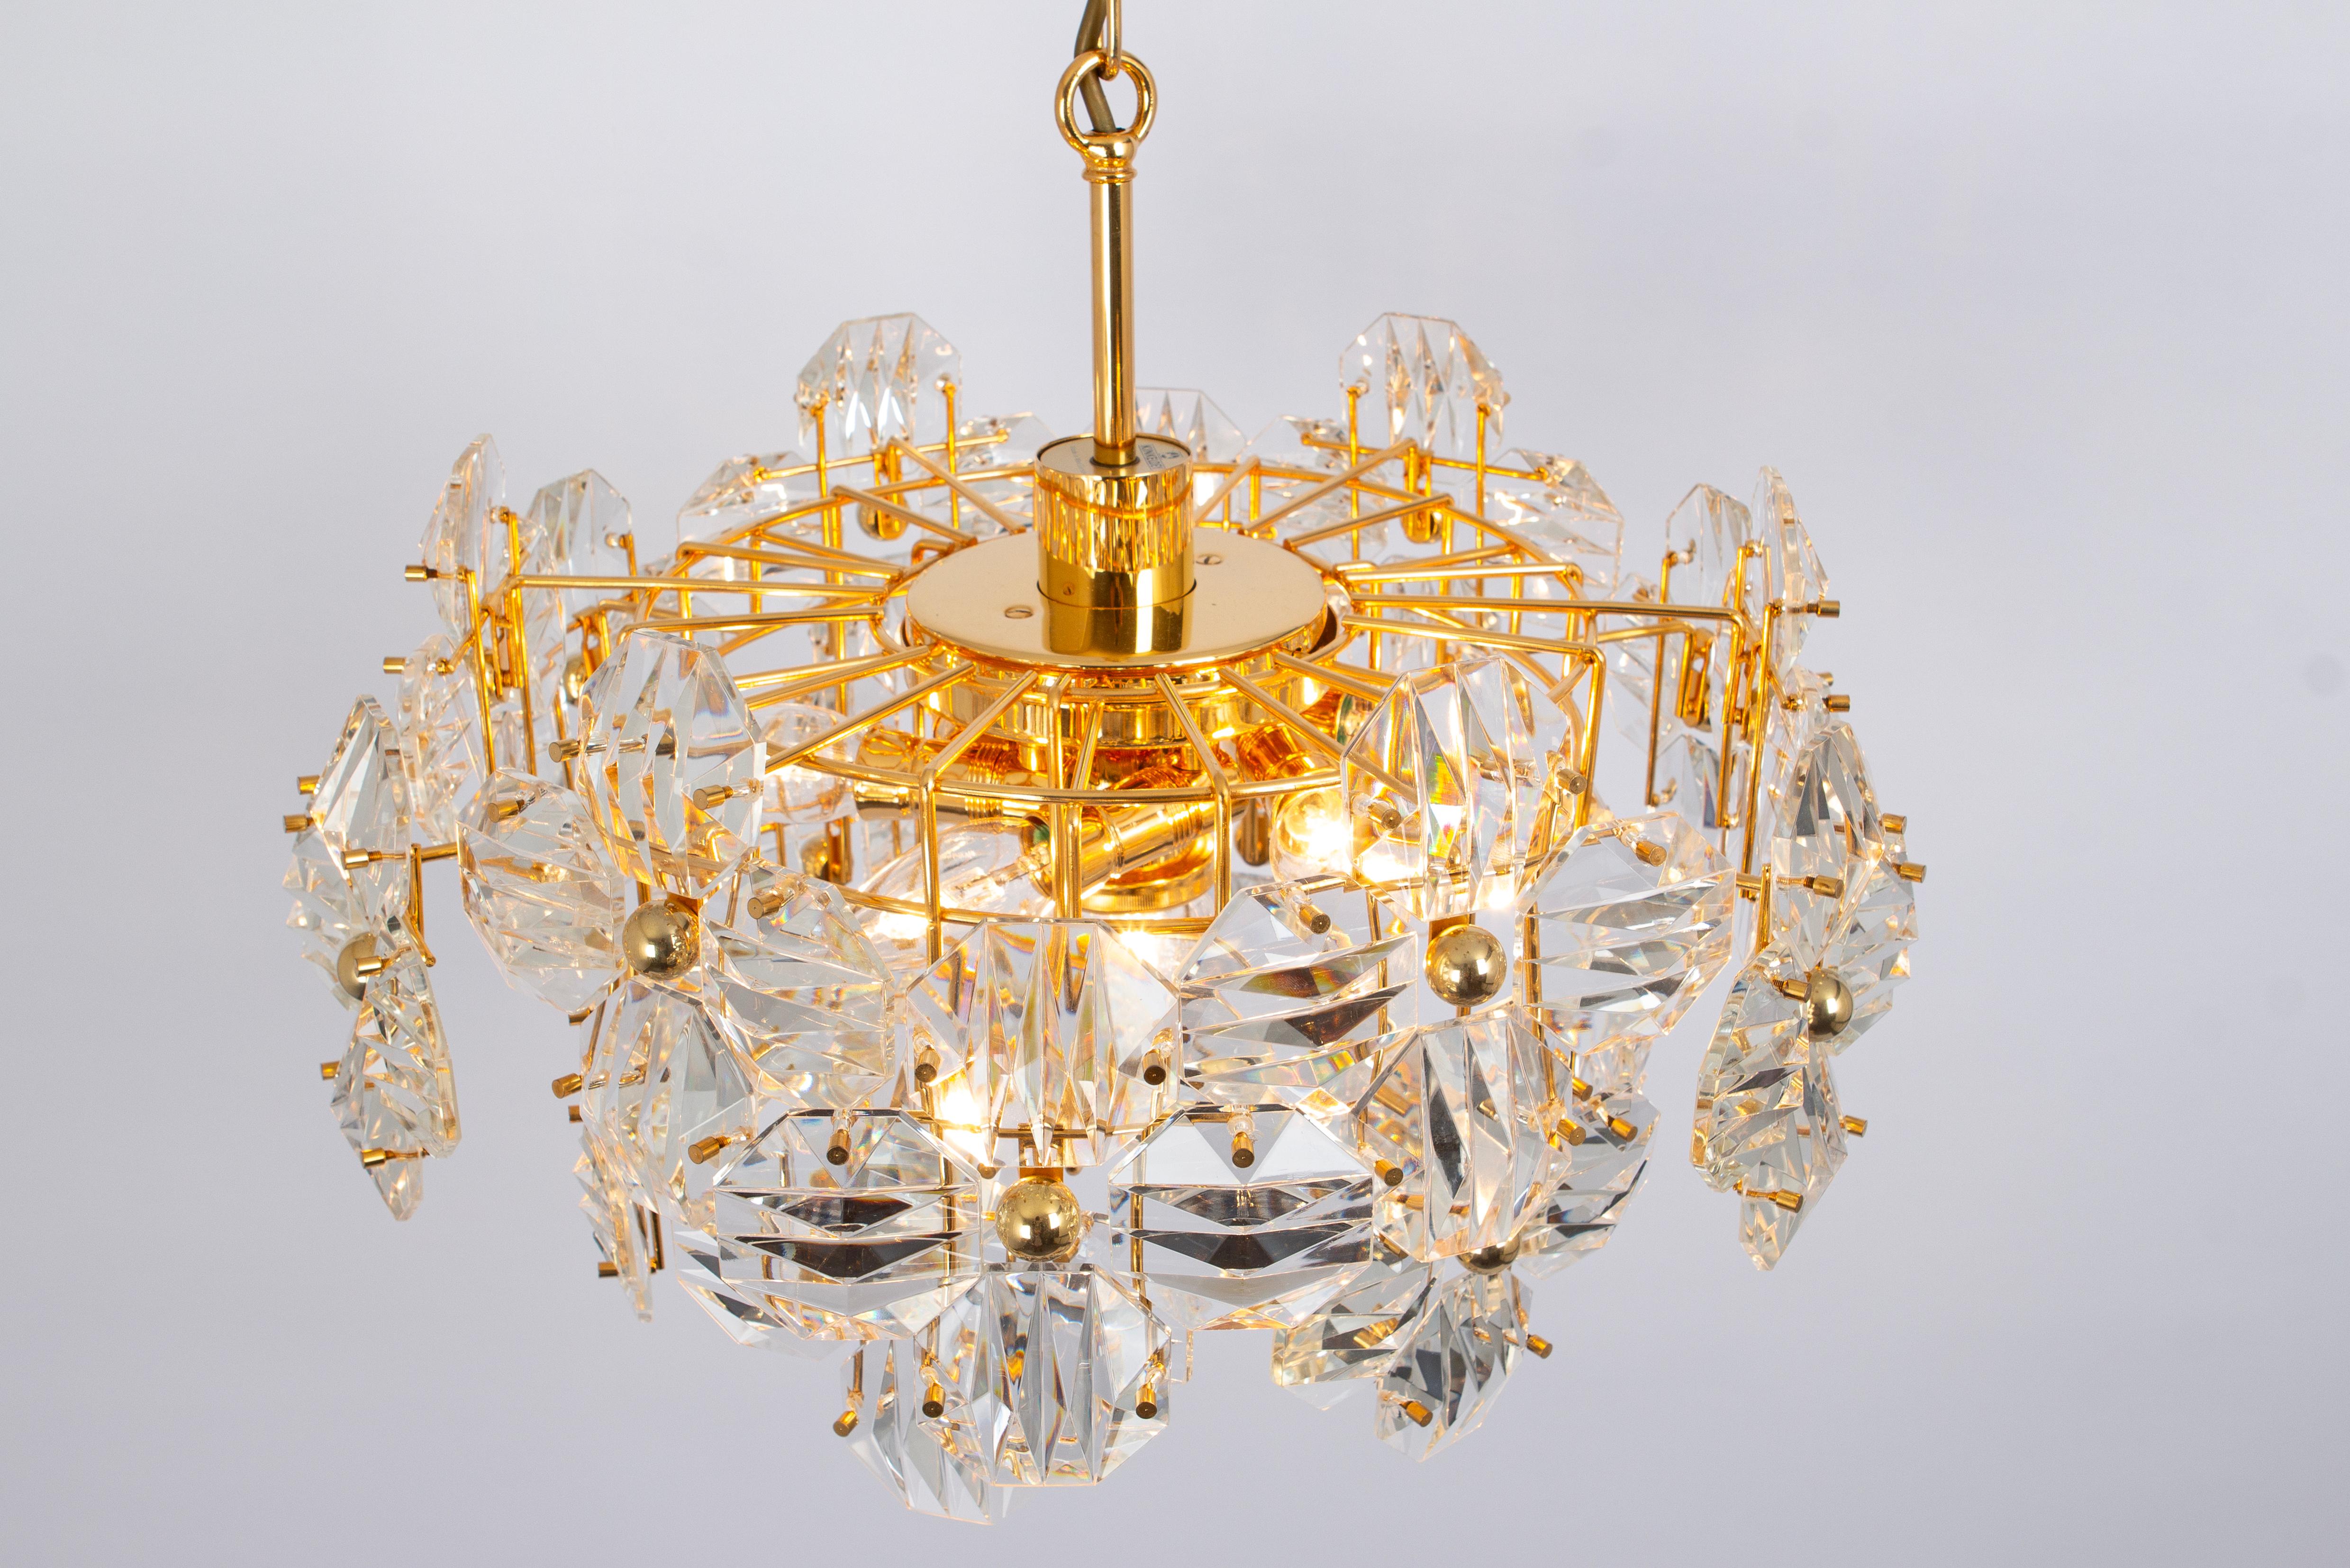 1 of 2 Stunning Chandelier, Brass and Crystal Glass by Kinkeldey, Germany, 1970s For Sale 2